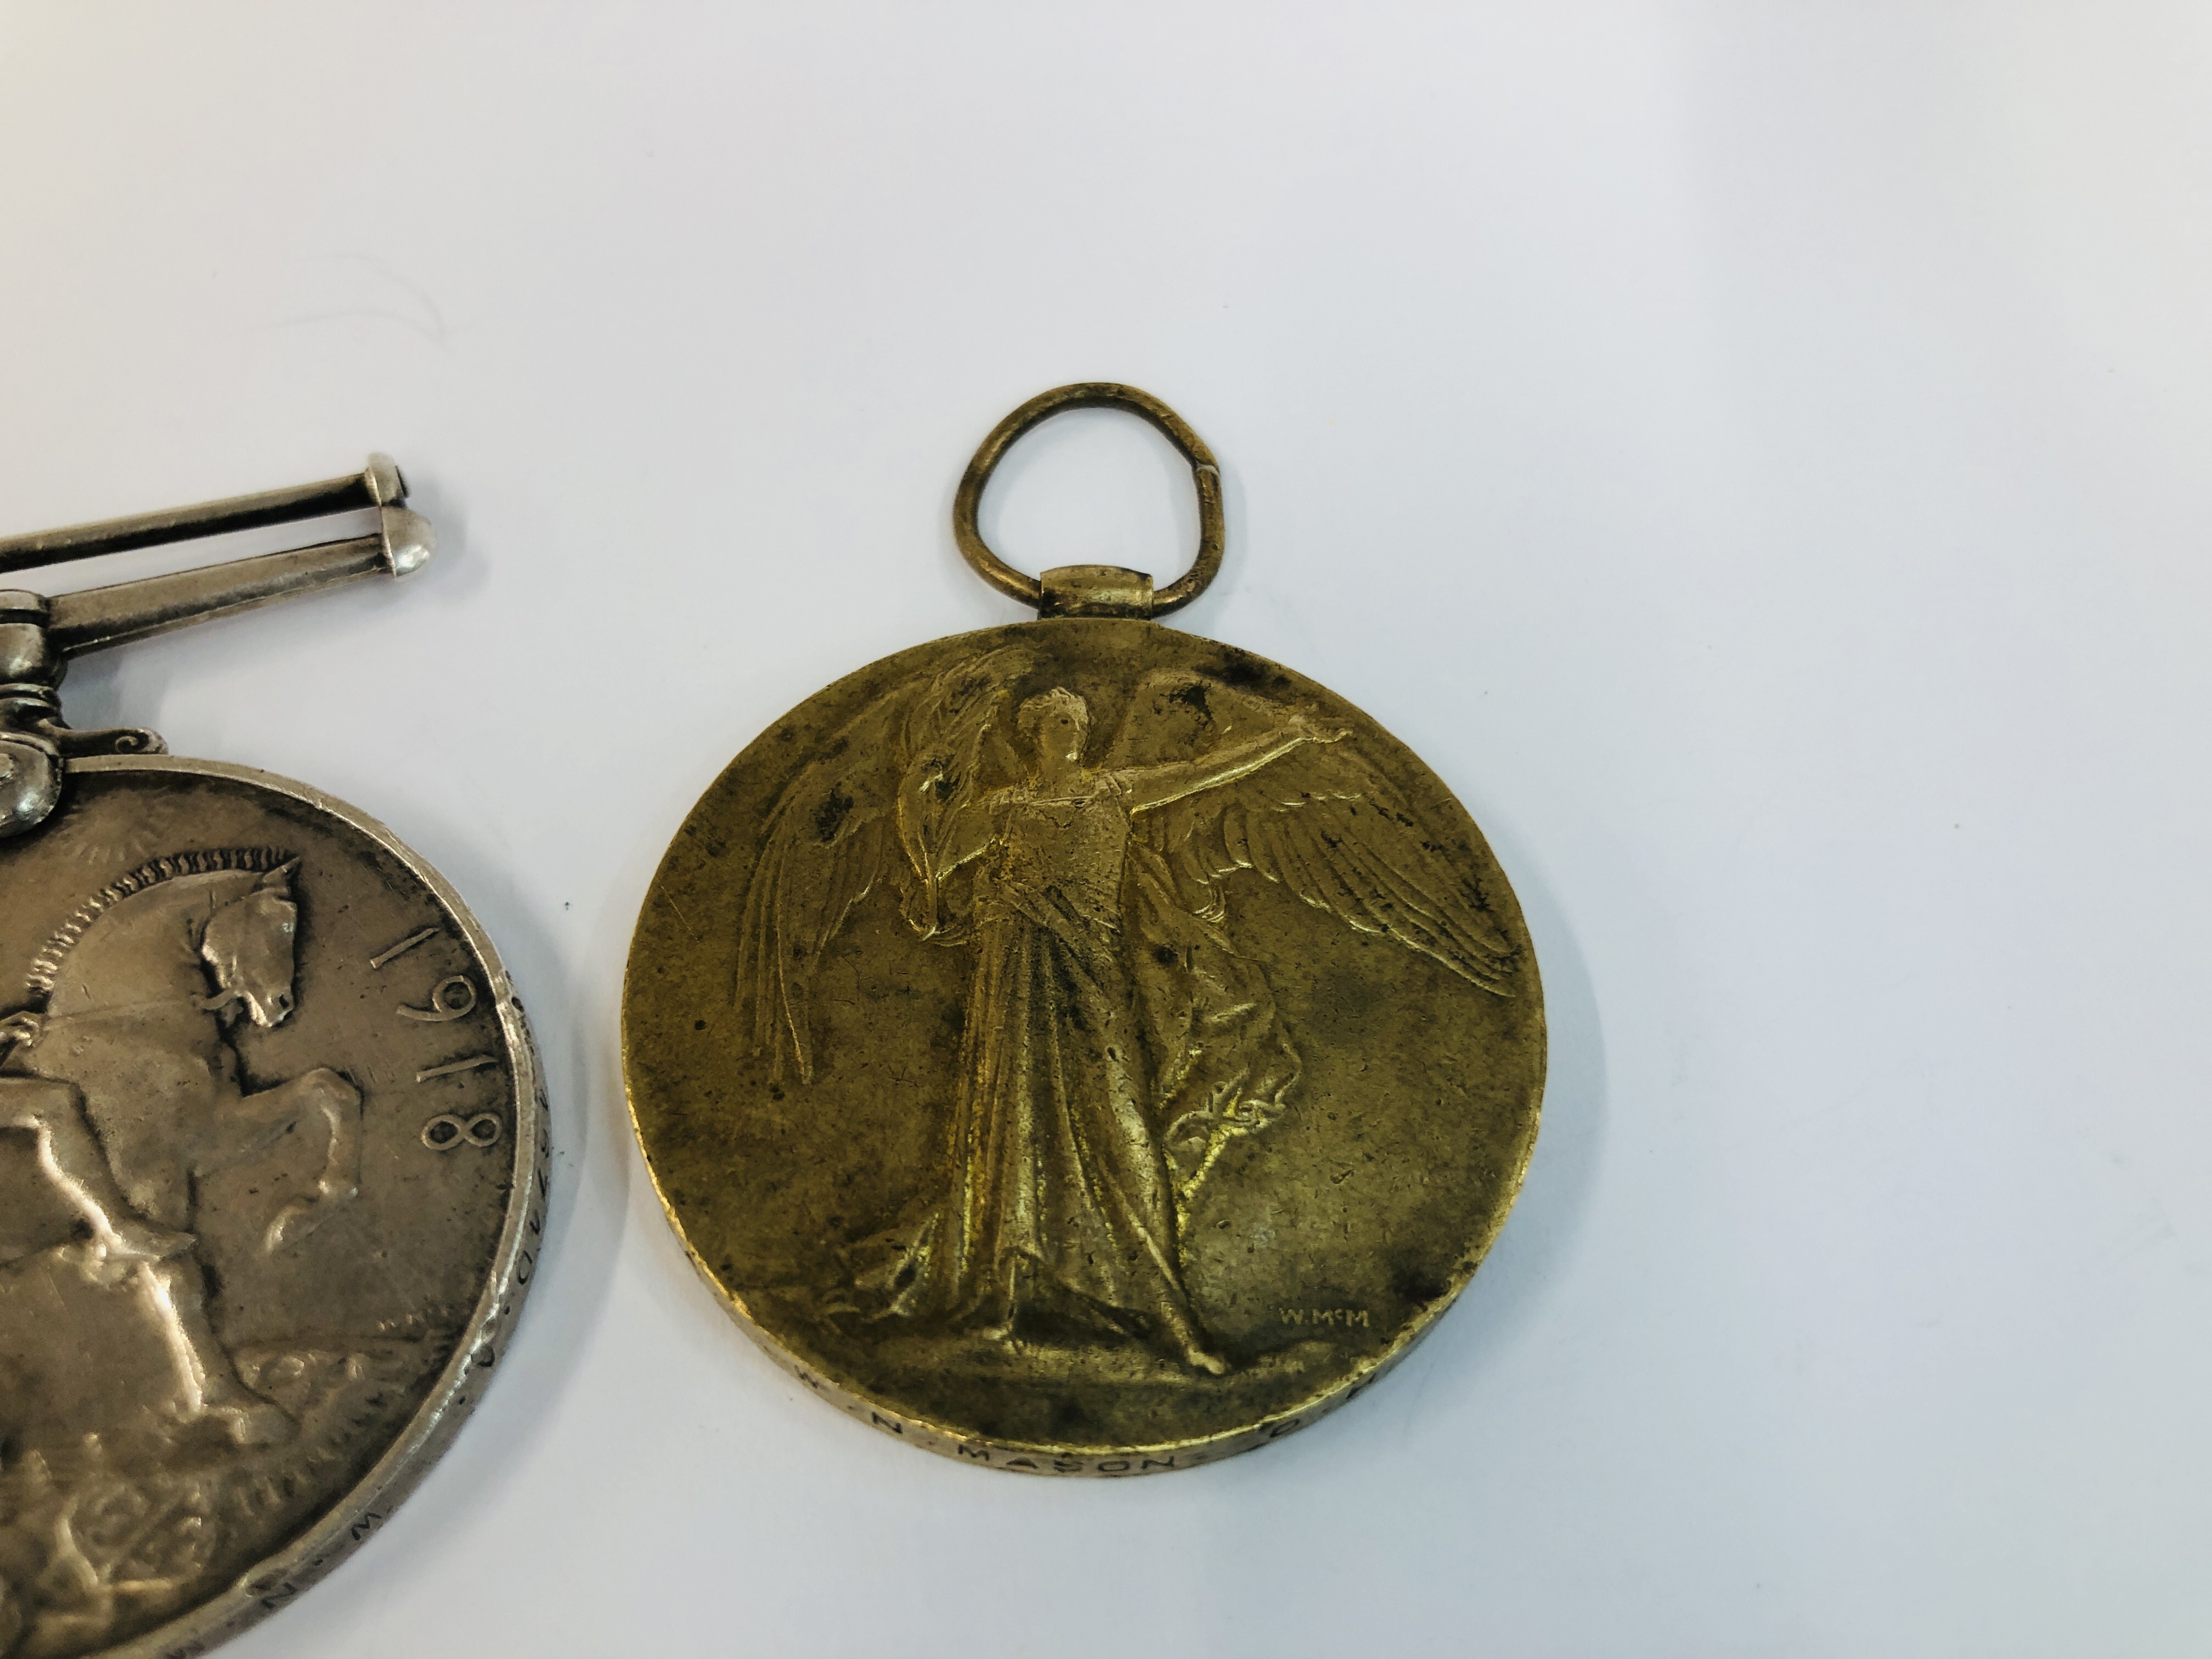 2 MEDALS FROM WW1 1914-1919 & 1914-1918 "THE GREAT WAR FOR CIVILISATION" PRESENTED TO W.N. MASON D. - Image 2 of 5